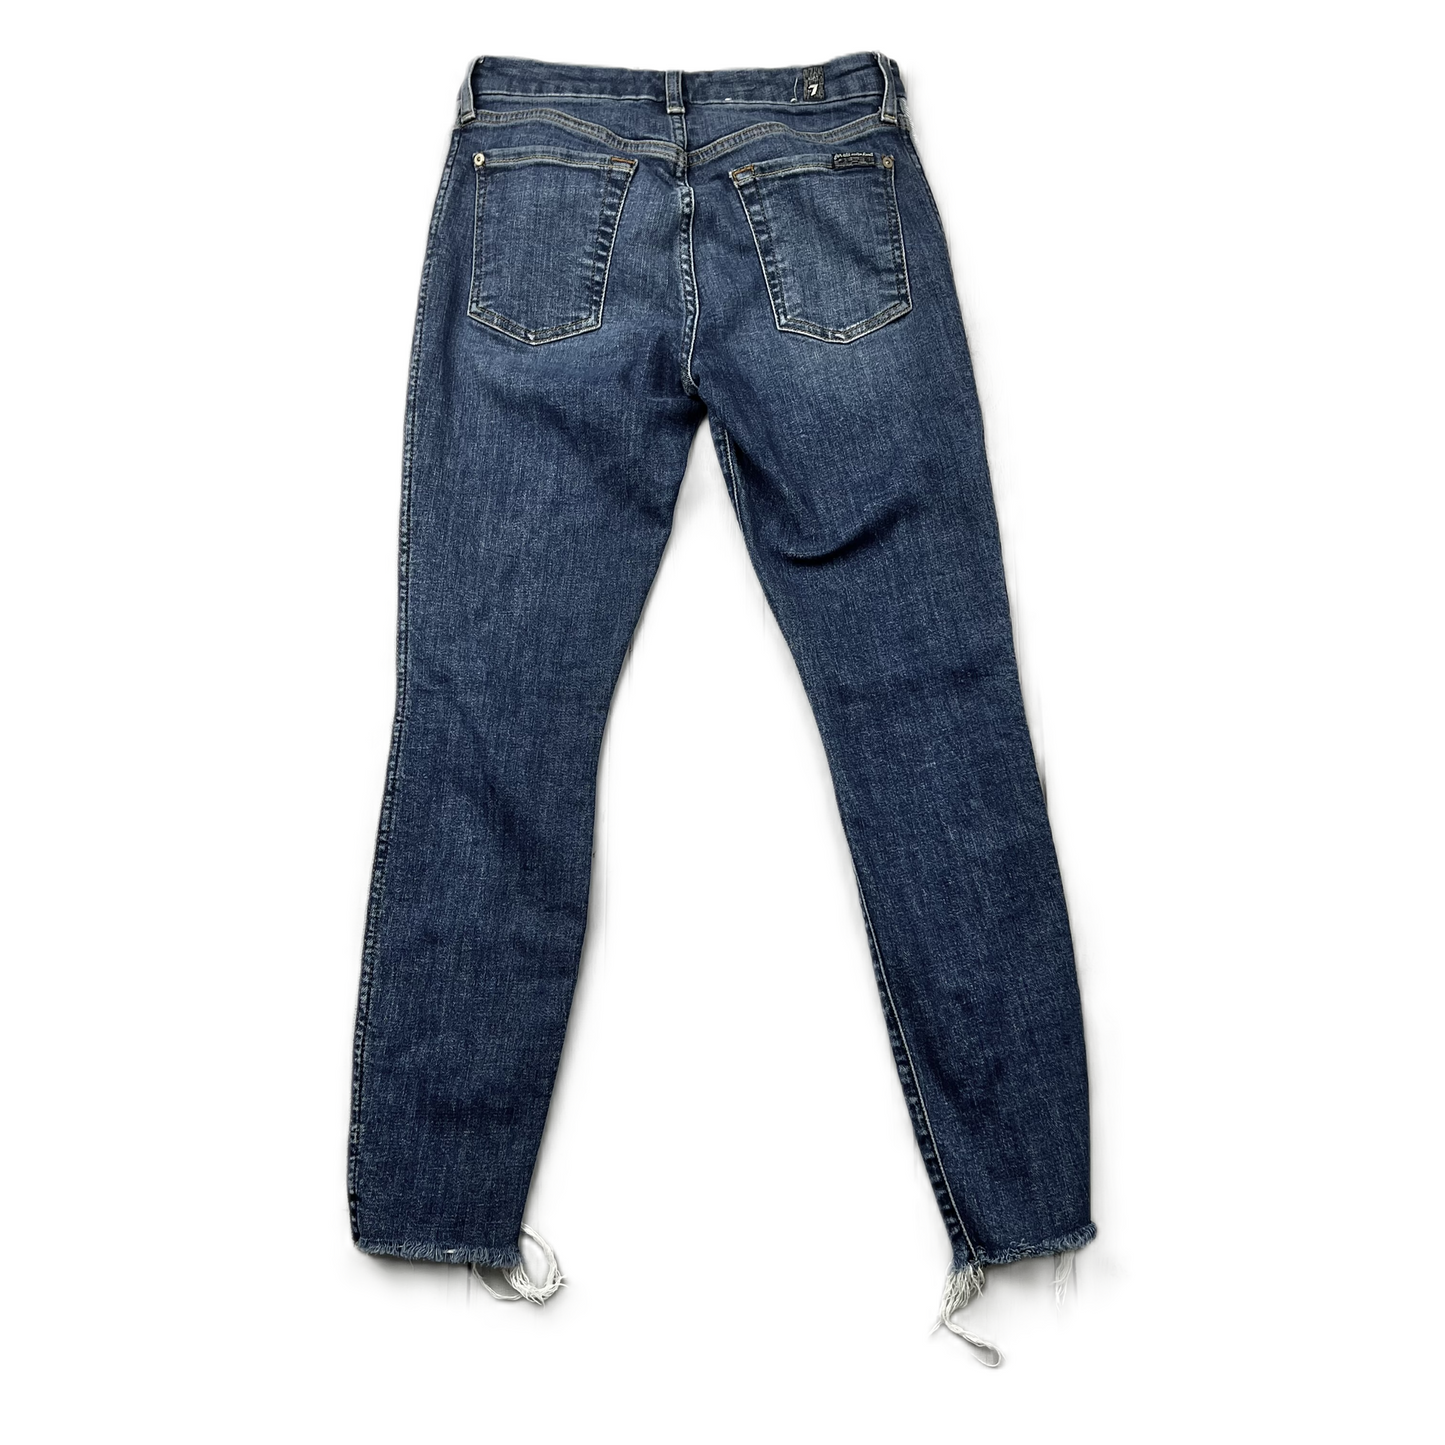 Denim Blue Jeans Skinny By 7 For All Mankind, Size: 4